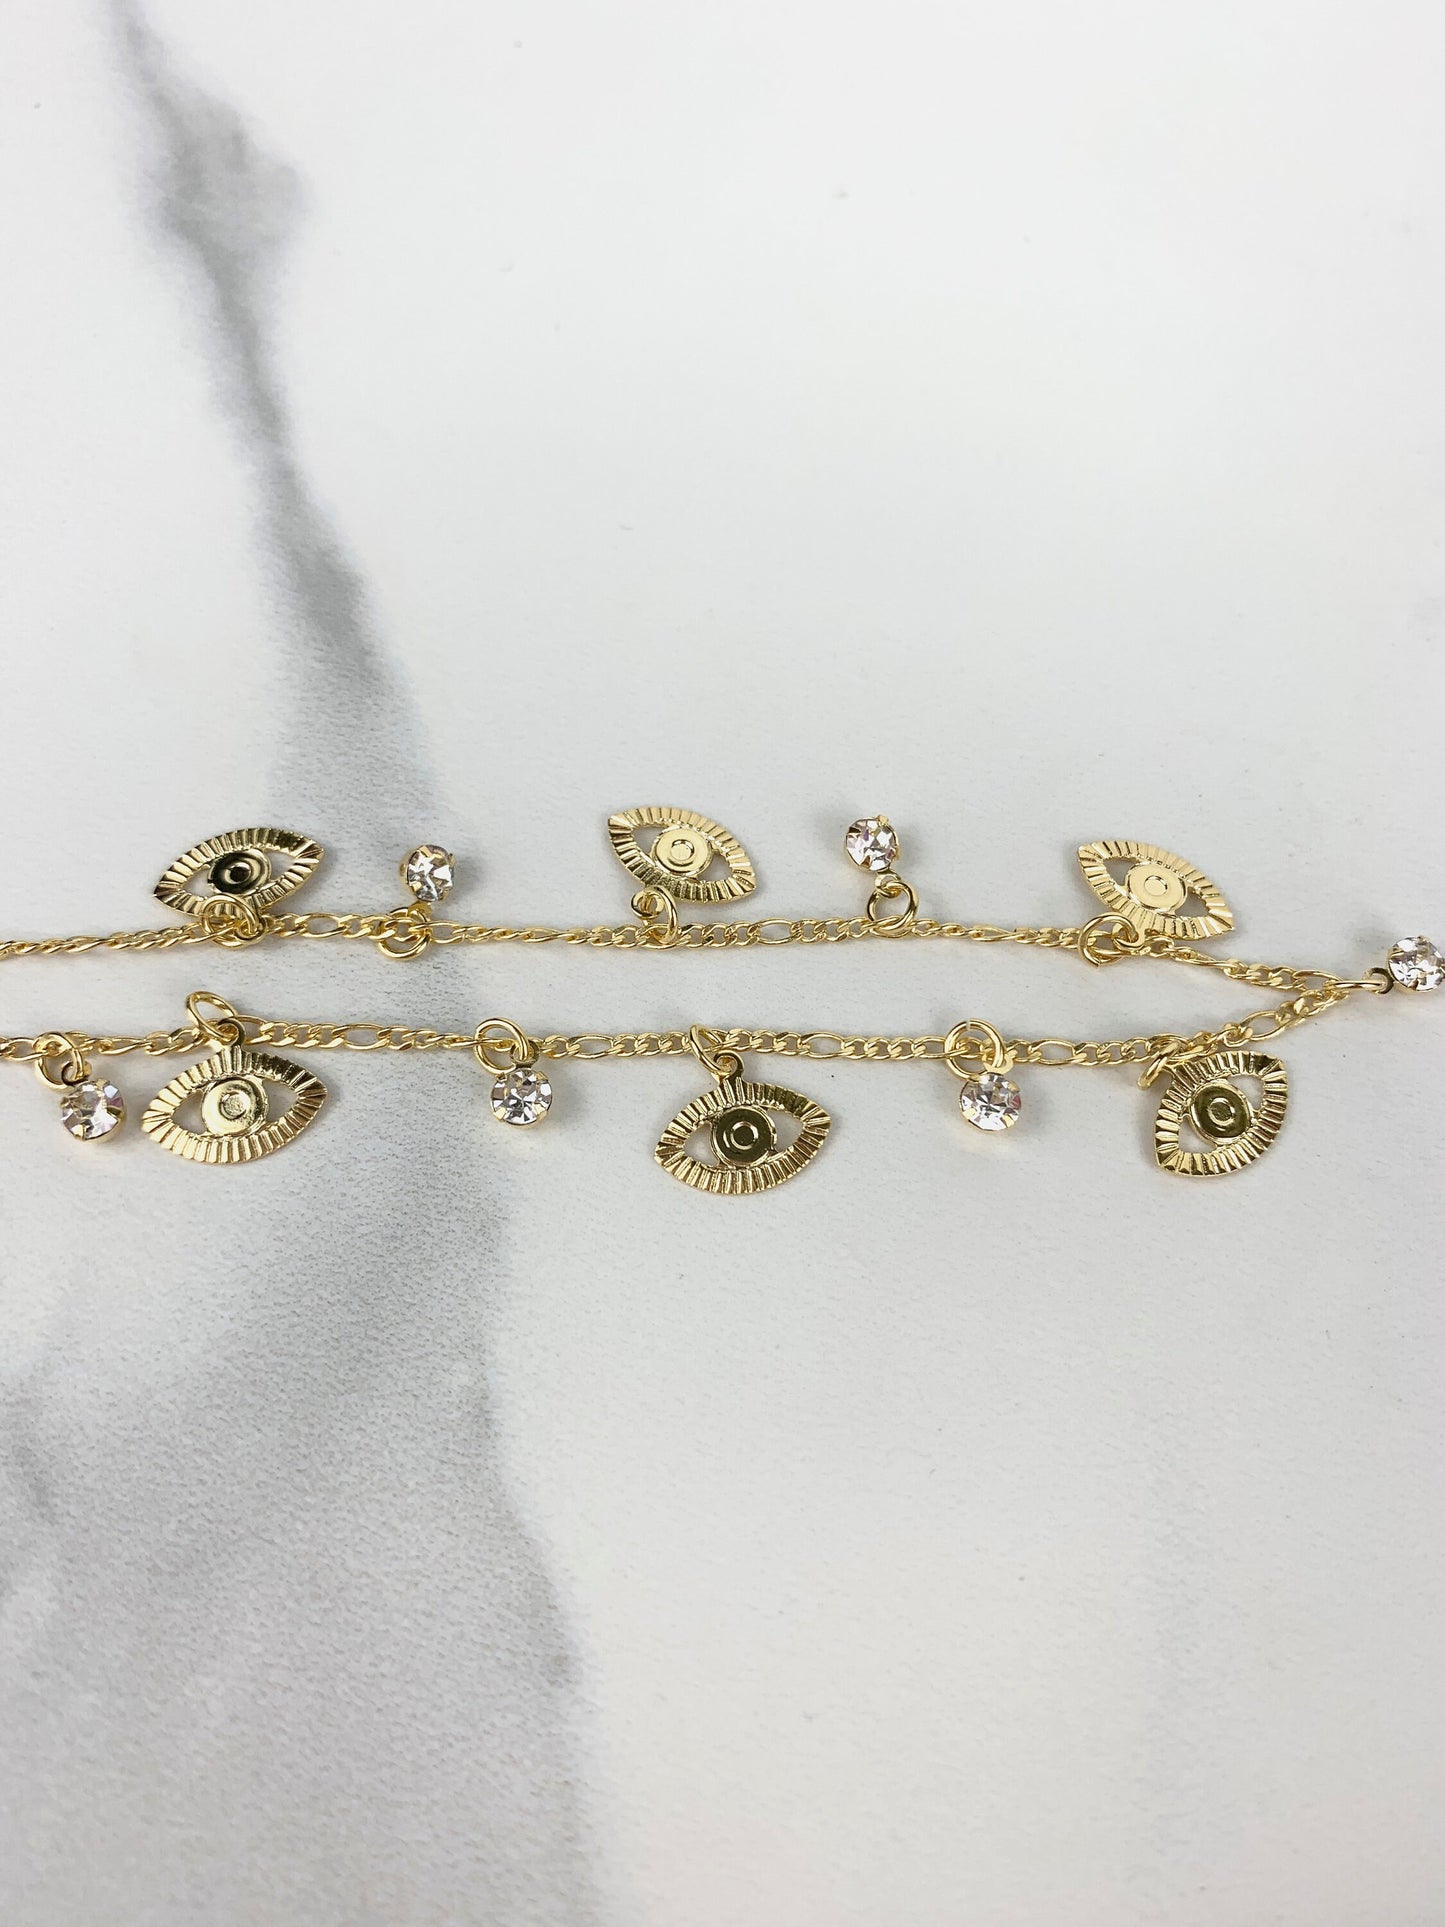 18k Gold Filled Fancy Eyes Anklet Wholesale Jewelry Supplies